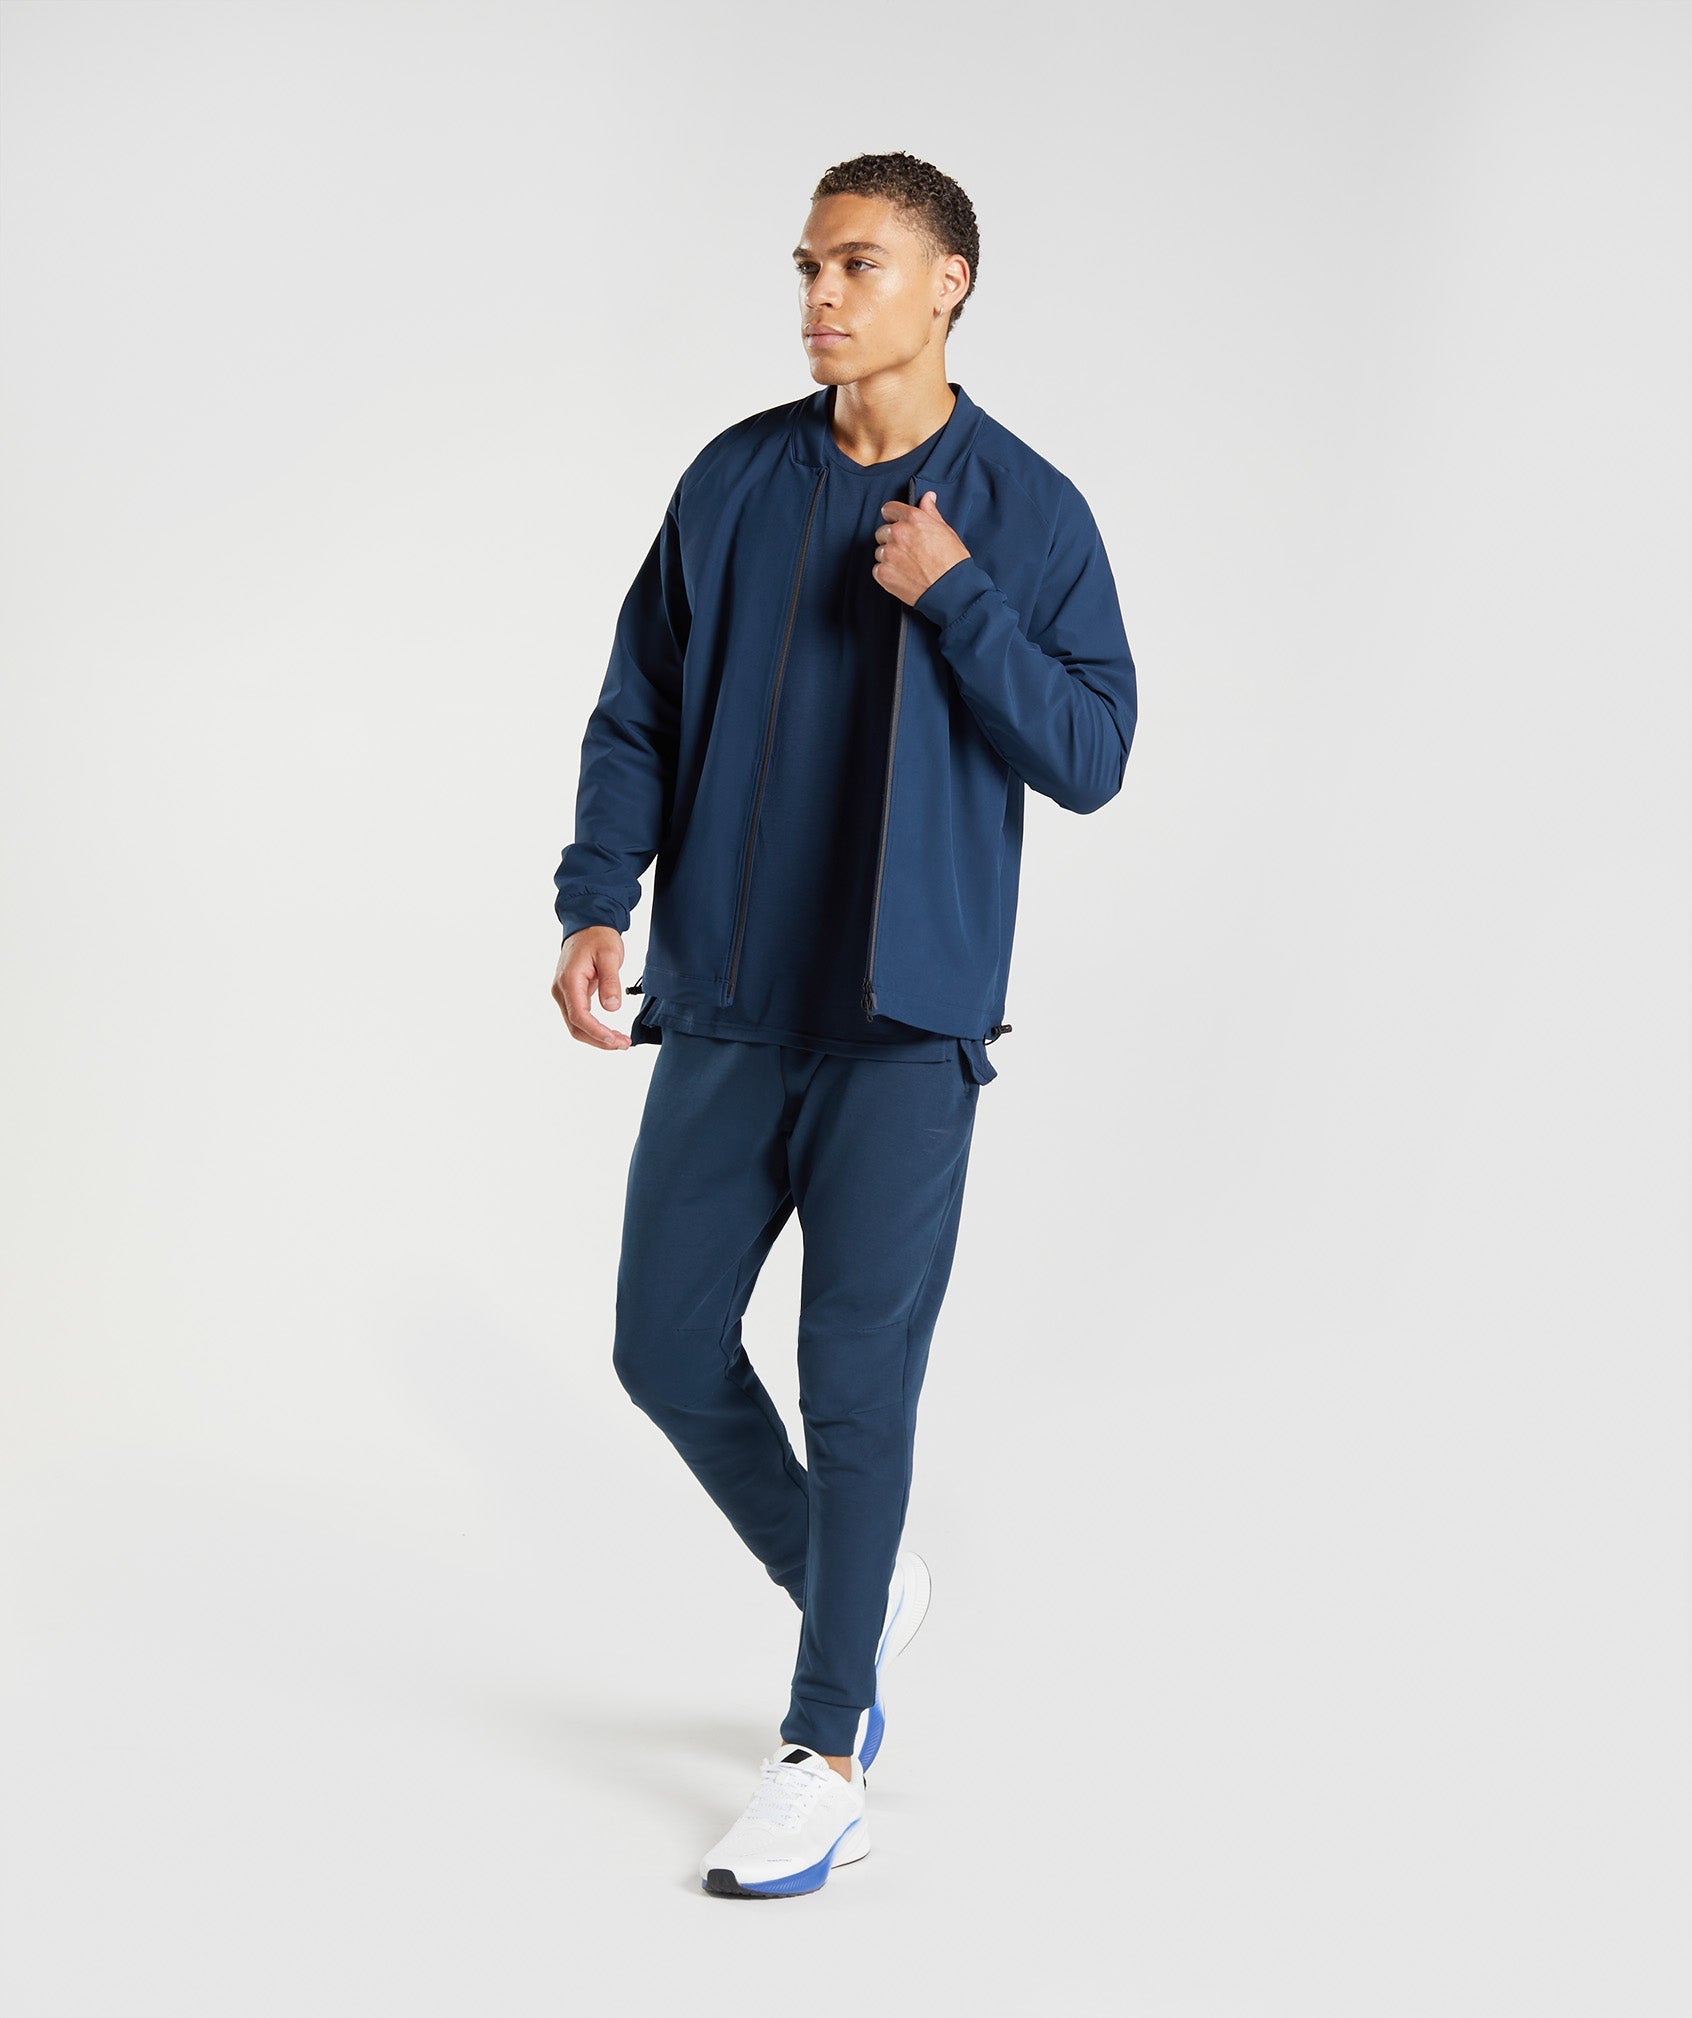 Rest Day Knit Joggers in Navy - view 4